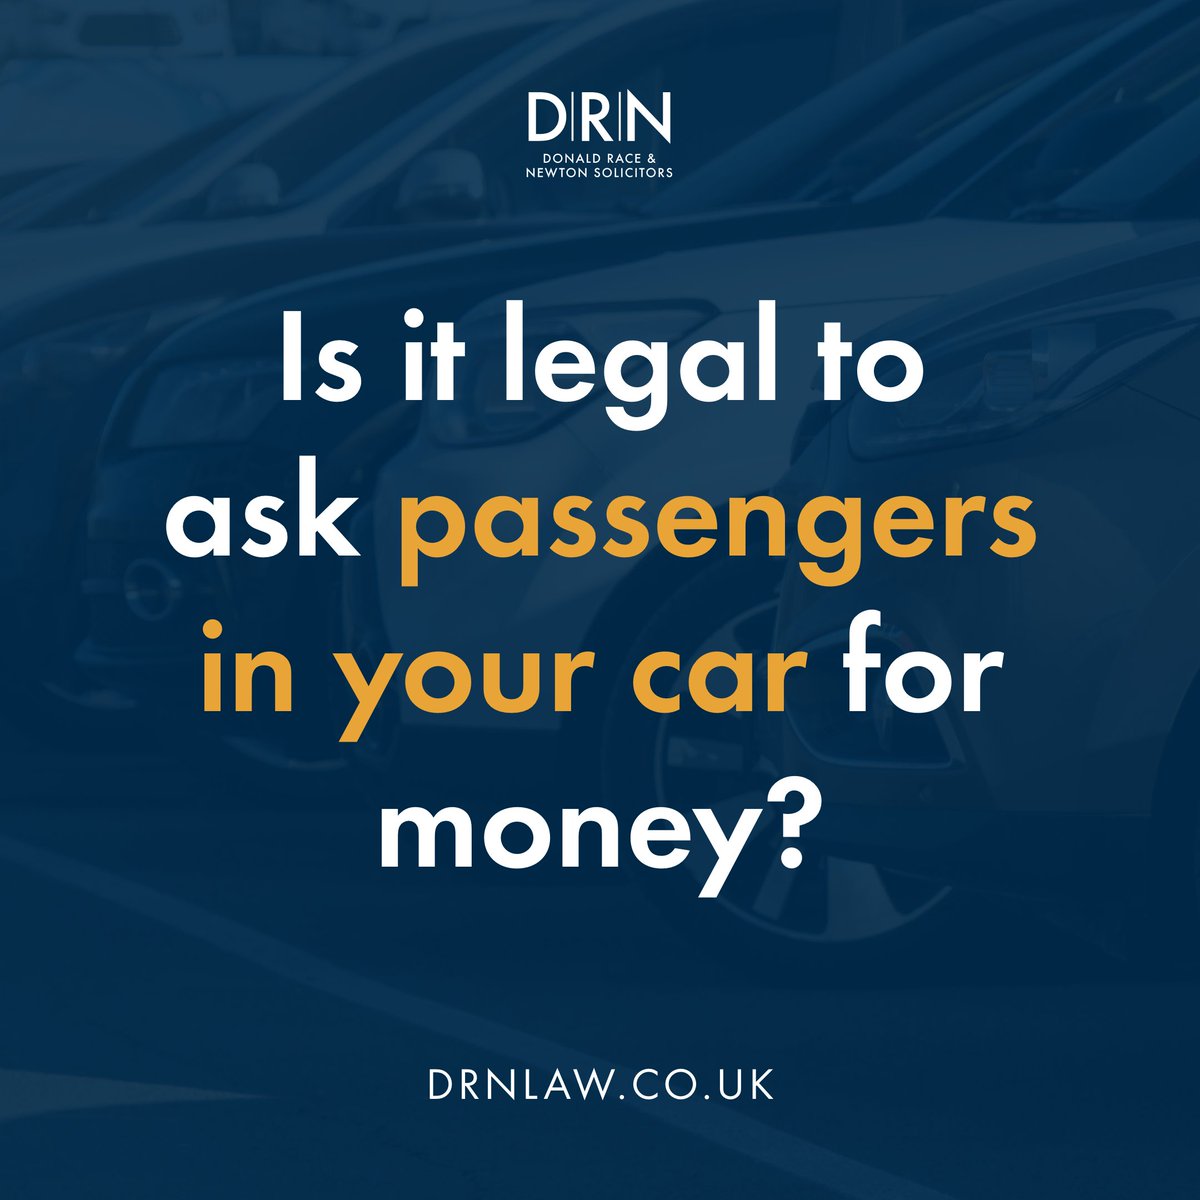 Here's the deal: 🚗 Profiting from driving passengers may affect your car insurance policy. 🚗 Operating as an unlicensed taxi can result in a fines and automatic driving ban. Found yourself in a difficult position following a road traffic incident? 👉 bit.ly/35j46uu